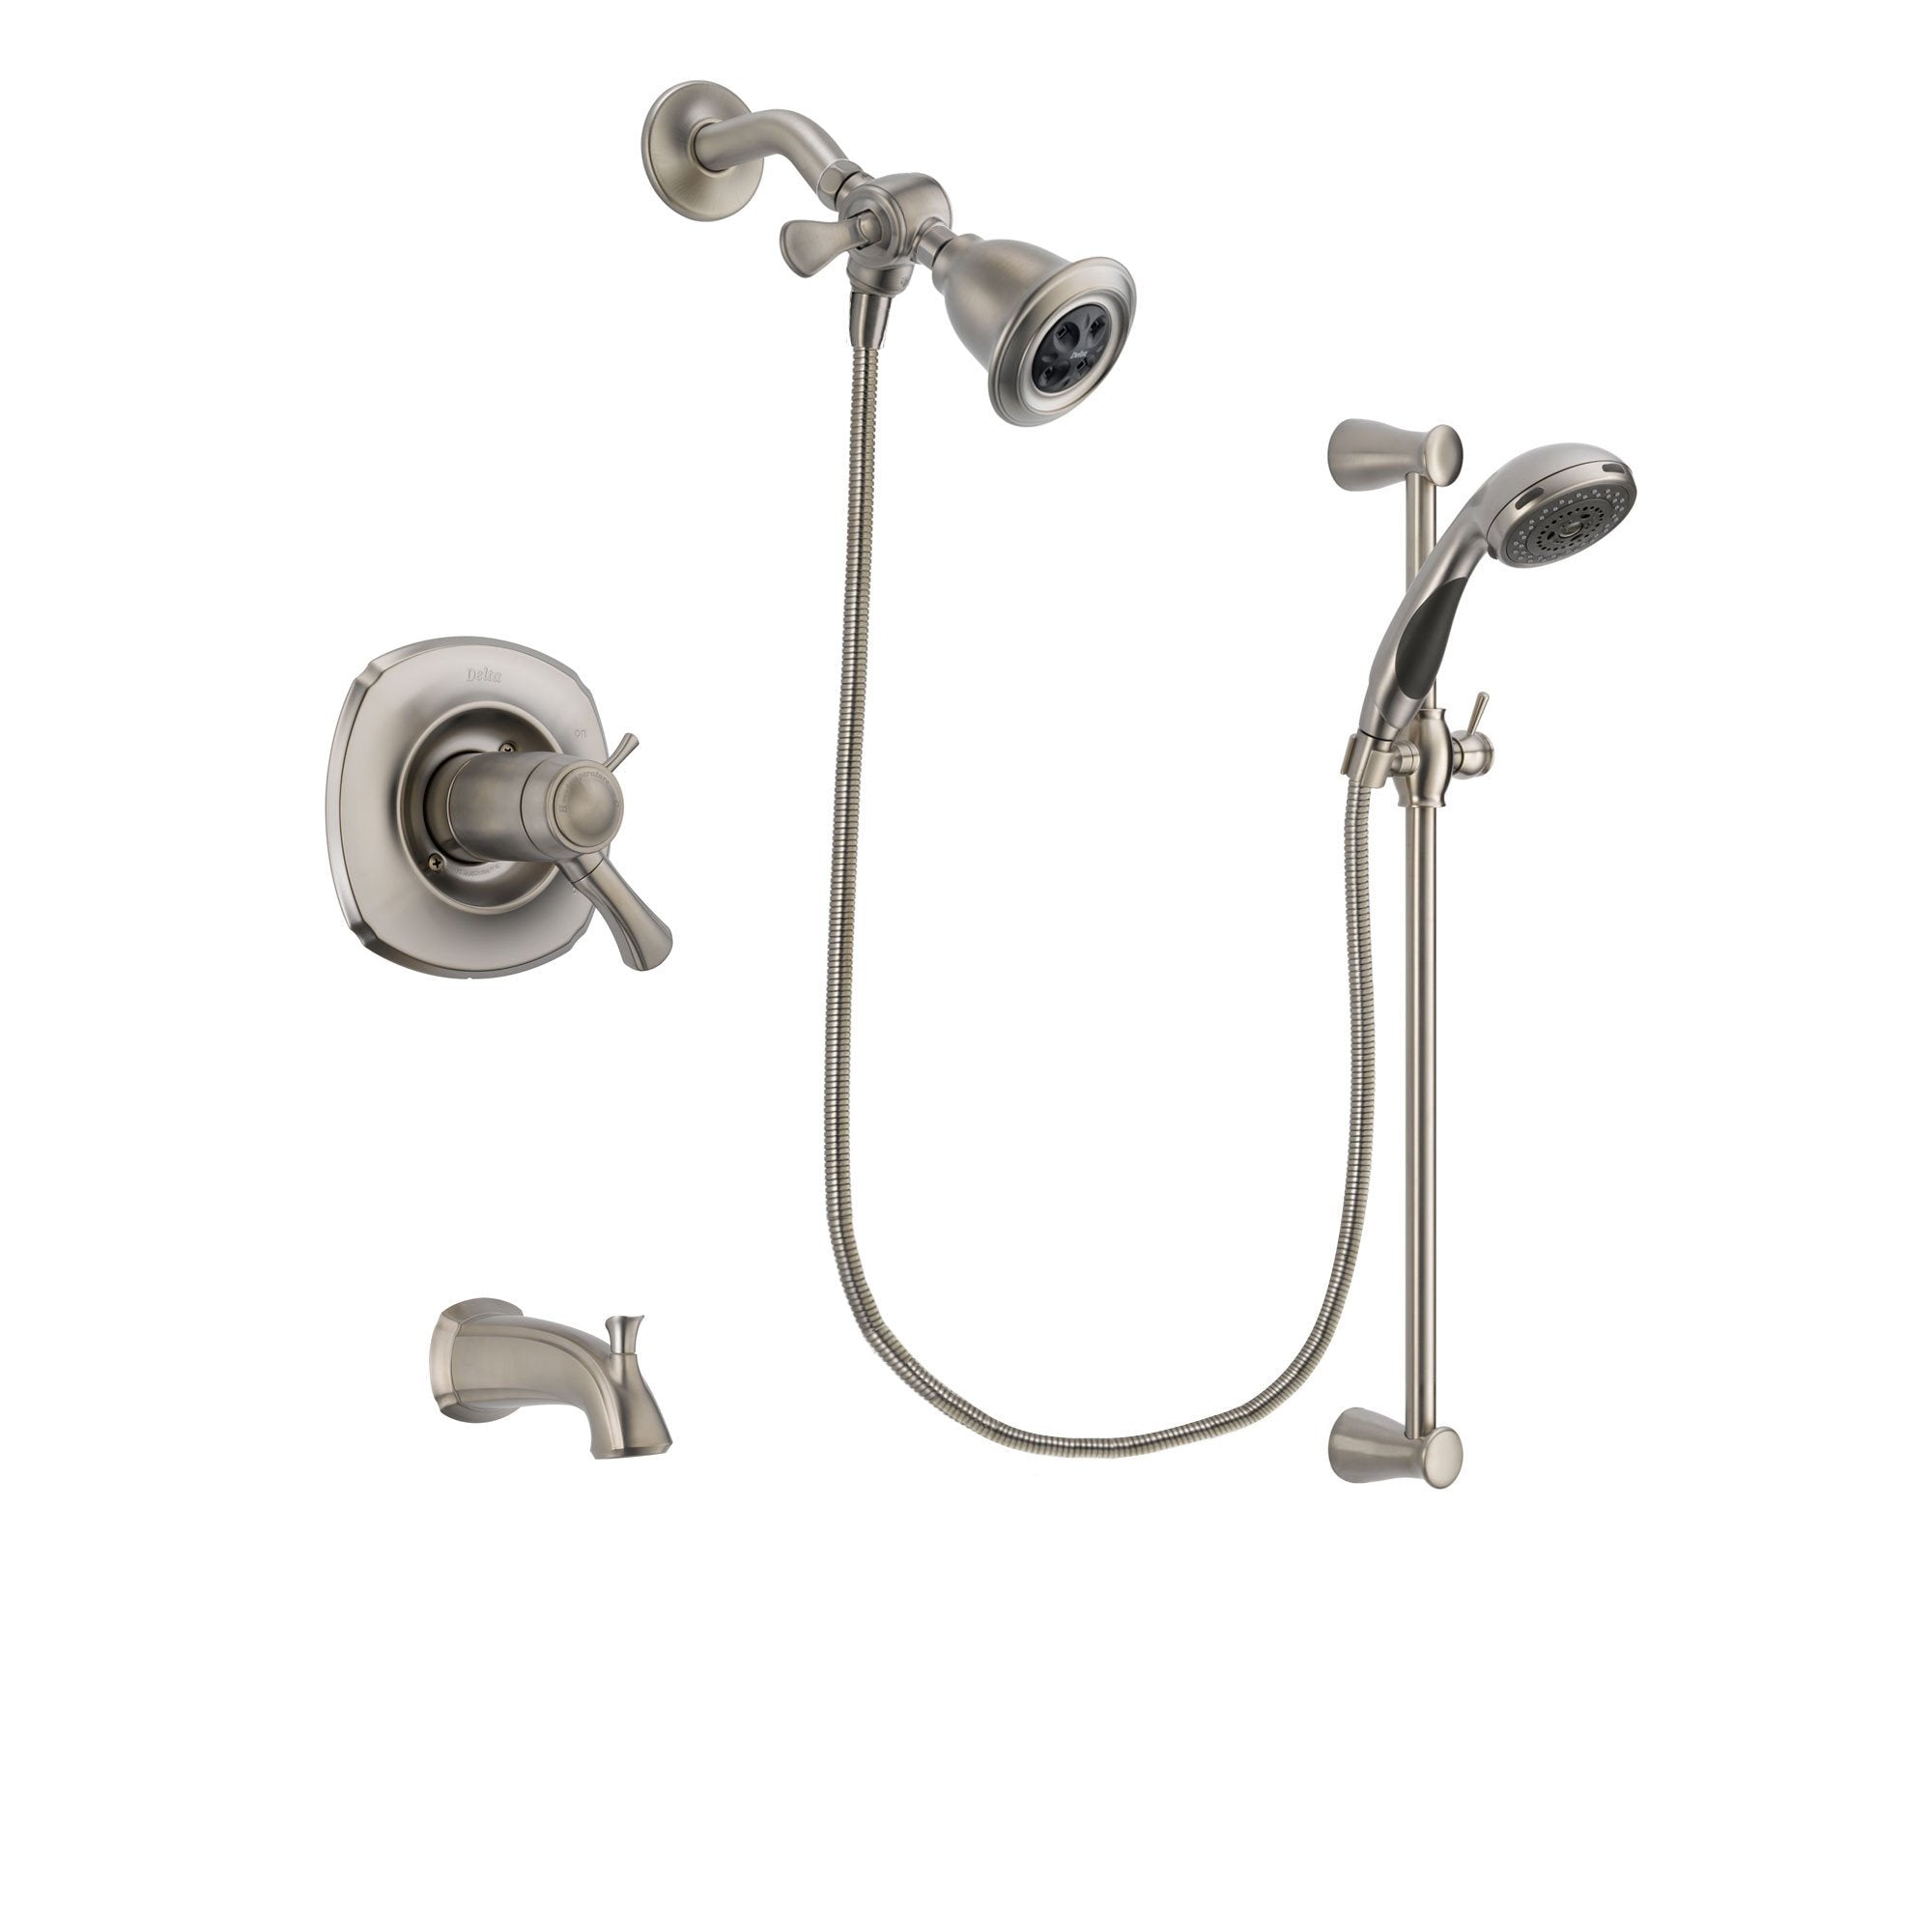 Delta Addison Stainless Steel Finish Thermostatic Tub and Shower Faucet System Package with Water Efficient Showerhead and Handheld Shower Spray with Slide Bar Includes Rough-in Valve and Tub Spout DSP1553V